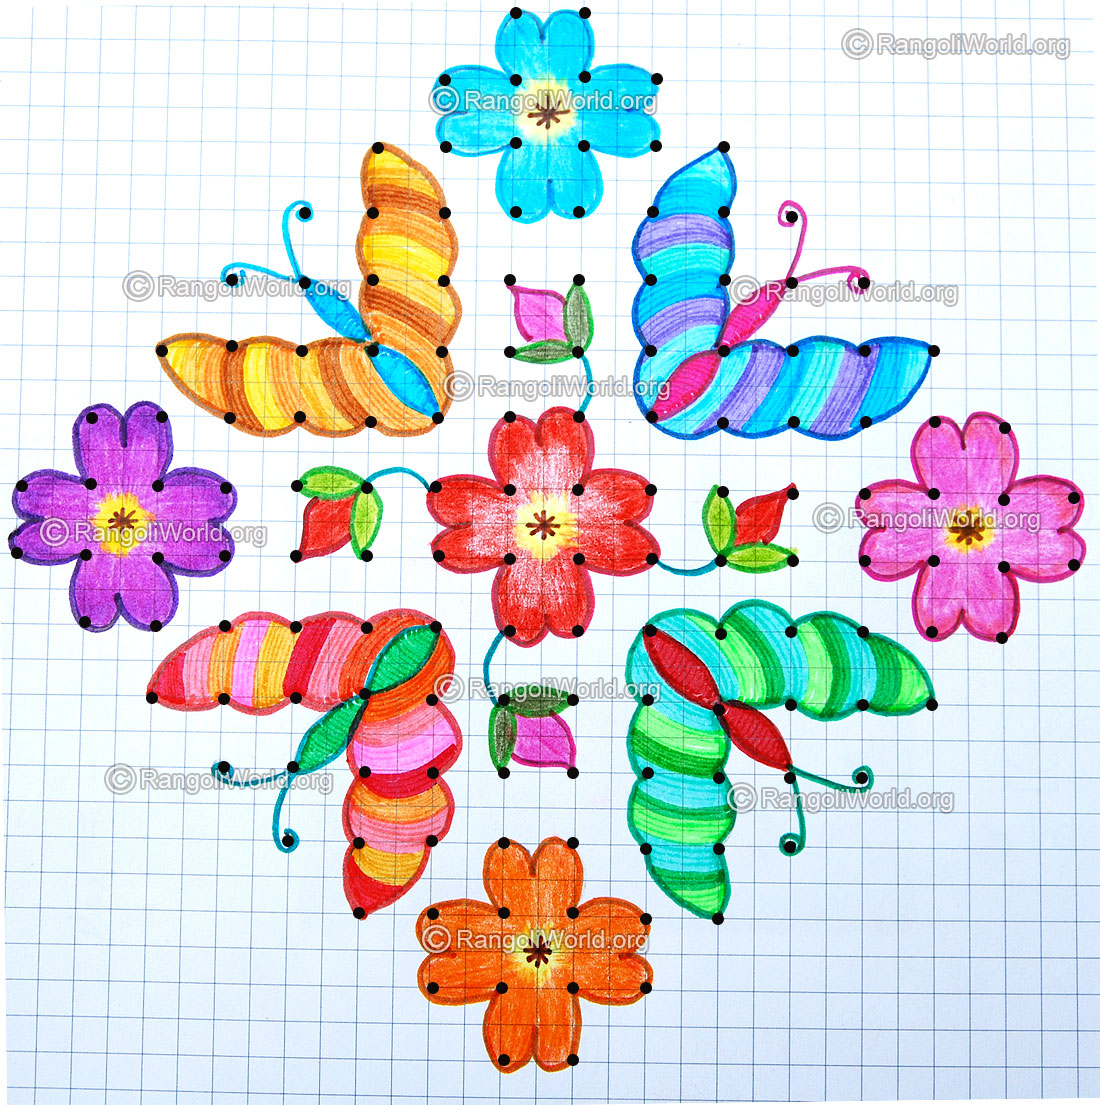 Butterfly kolam1 with dots